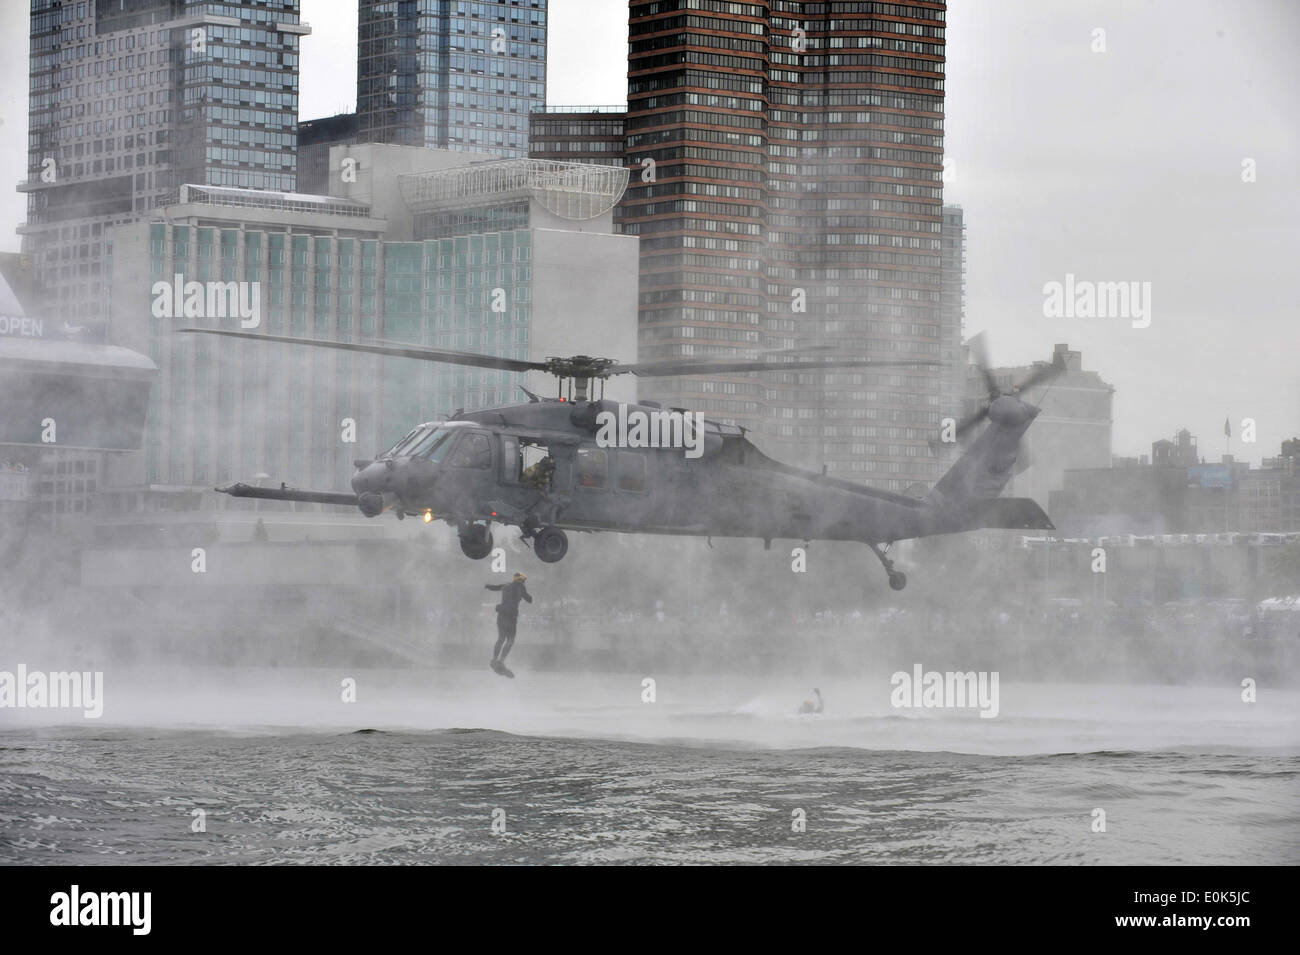 An HH-60 Pave Hawk helicopter from the New York Air National Guard's 106th Rescue Wing conducts a mock water rescue during an a Stock Photo